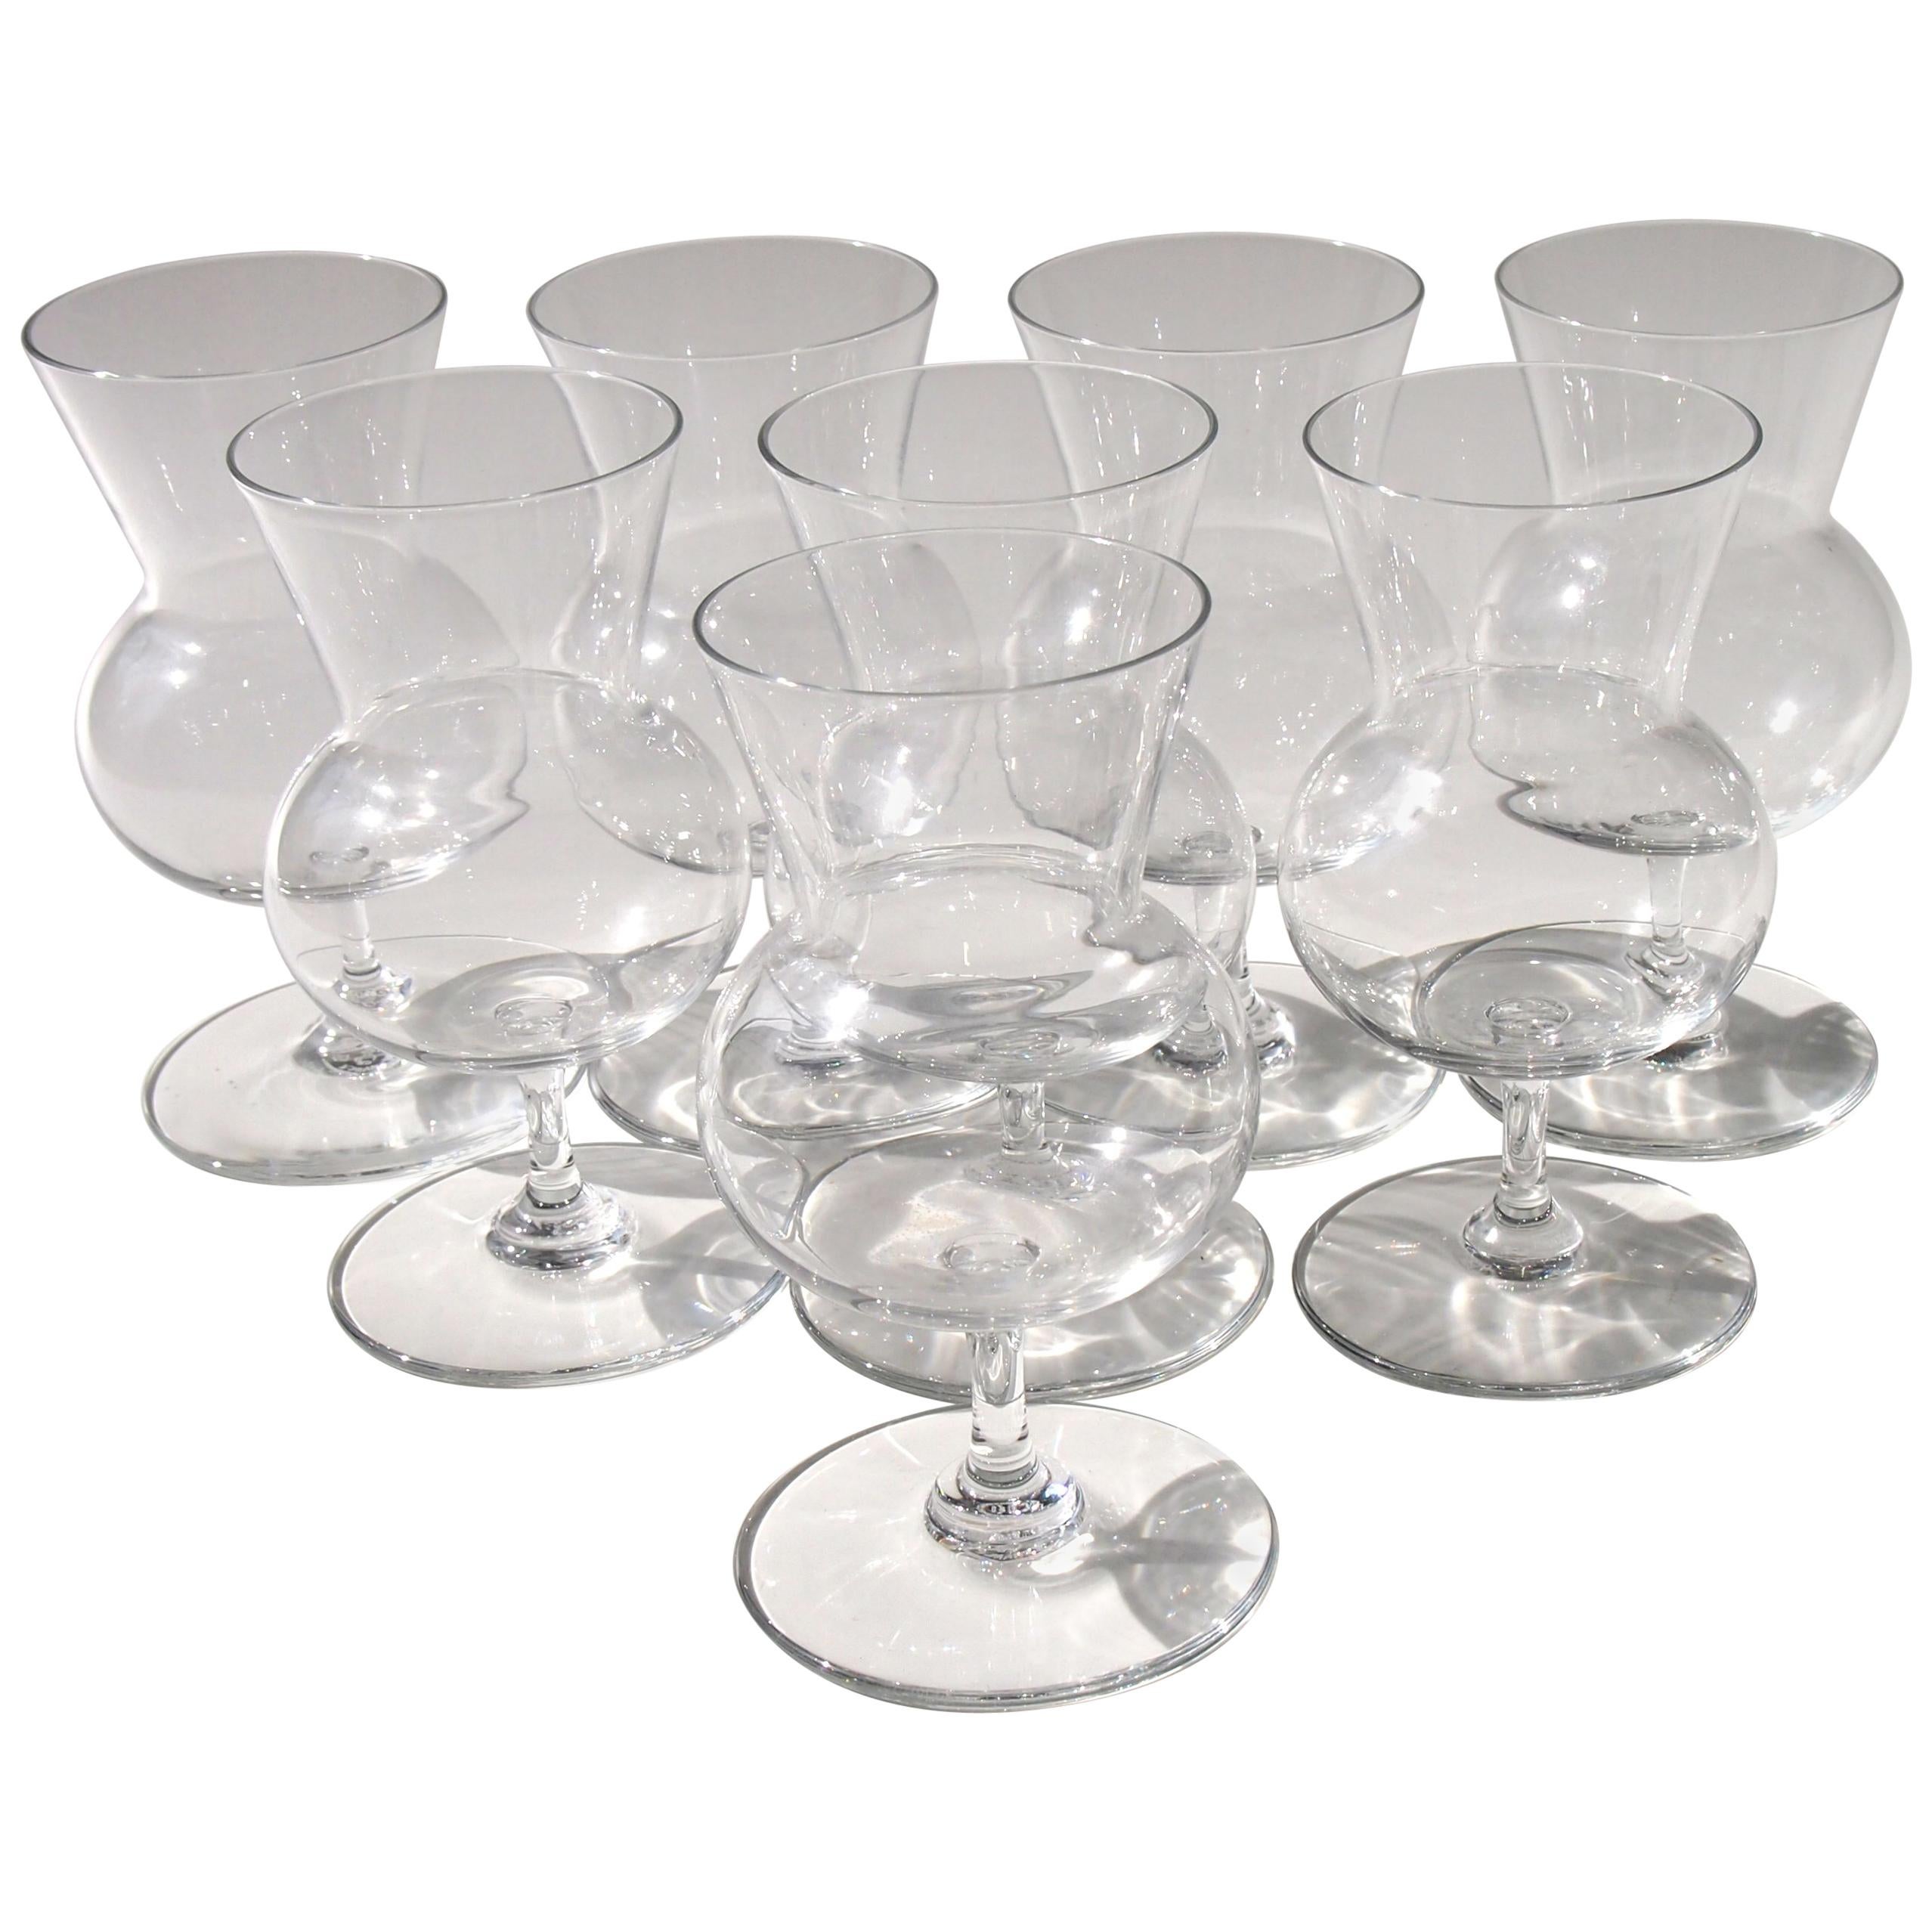 French Mid-Century Modern Baccarat Signed Crystal Glass Thistle Brandies, Set 8